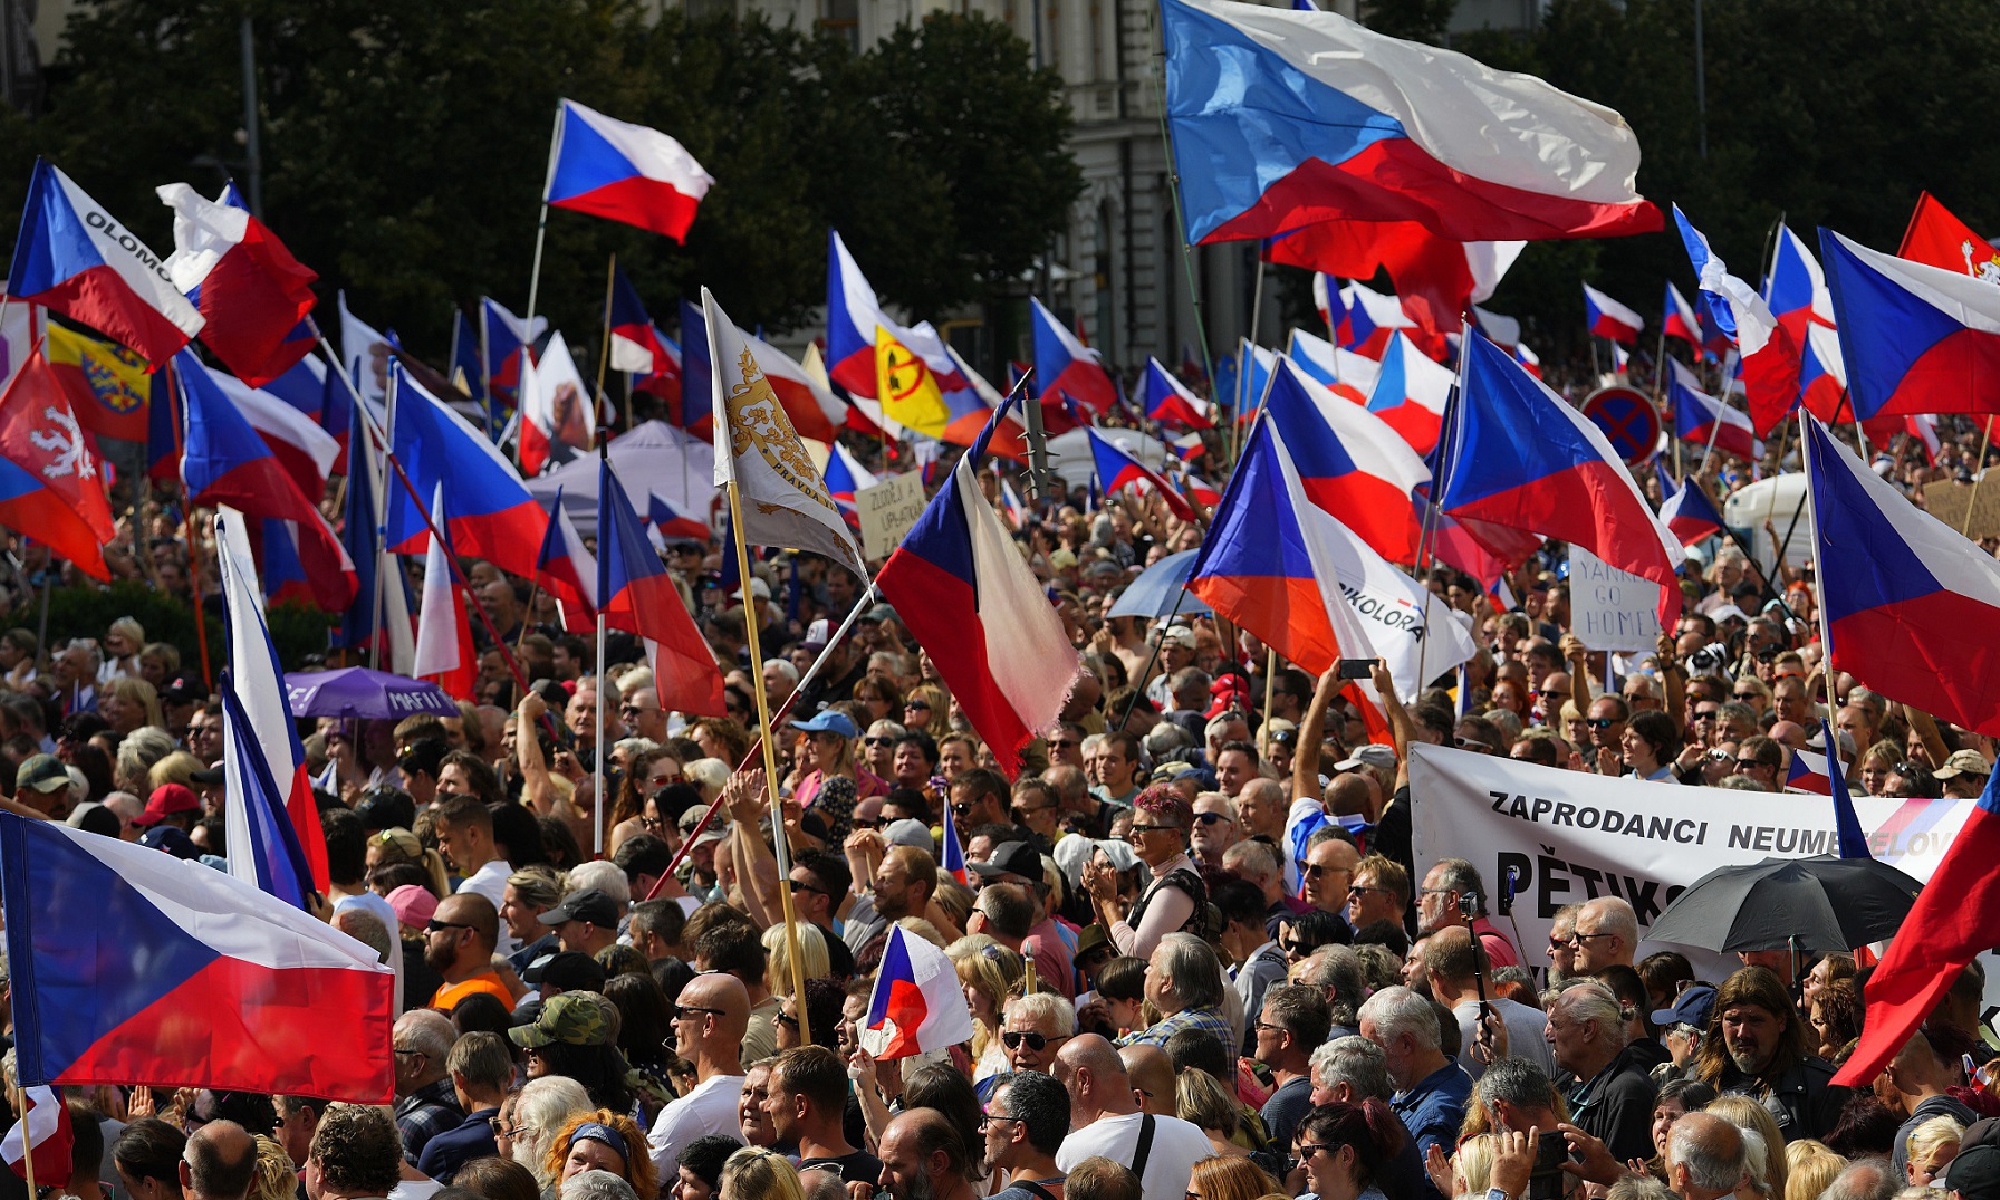 People wave national flags as they protest against Czech government at Wenceslas Square in Prague, Czech Republic, September 3, 2022. According to Czech police, 70,000 people attended a protest calling for the government to resign, while demanding mitigation of the energy crisis and repair of the damage. Photo: VCG